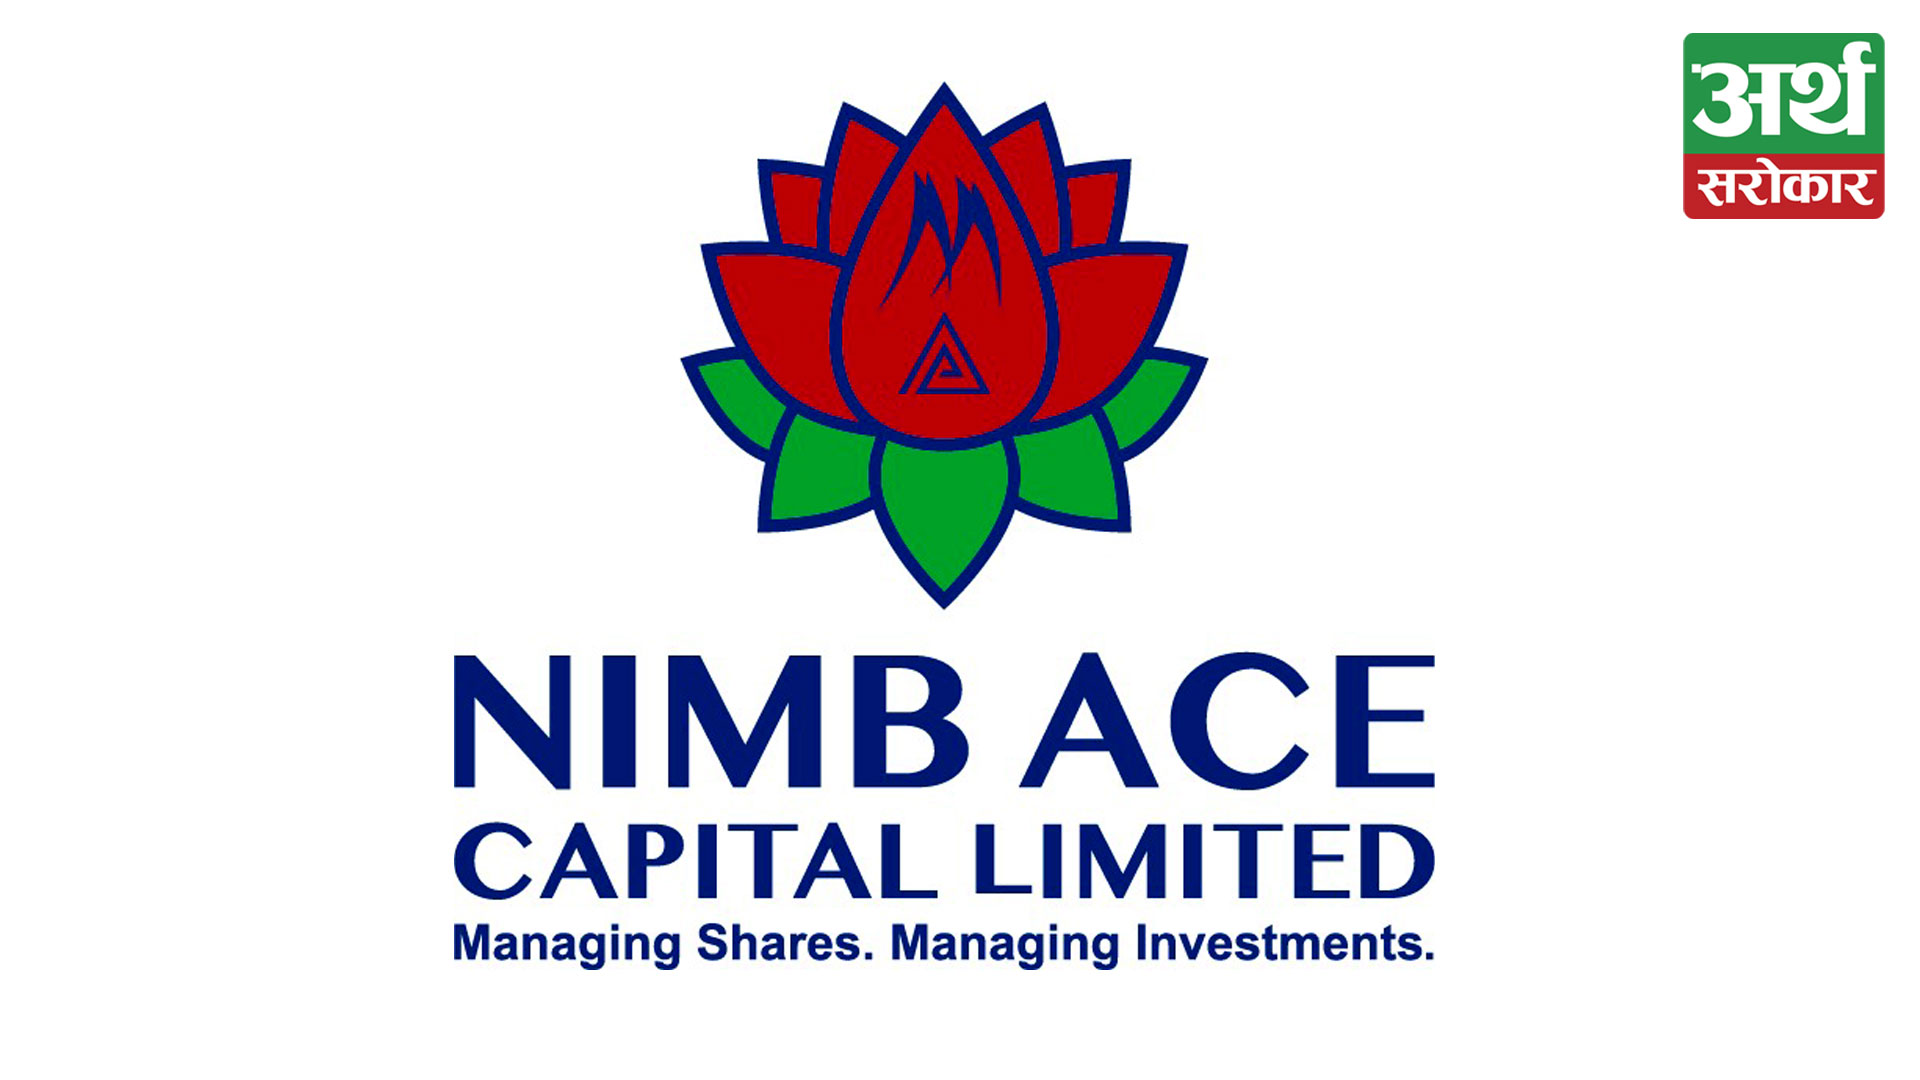 NIBL Ace Capital Limited has successfully acquired Mega Capital Markets